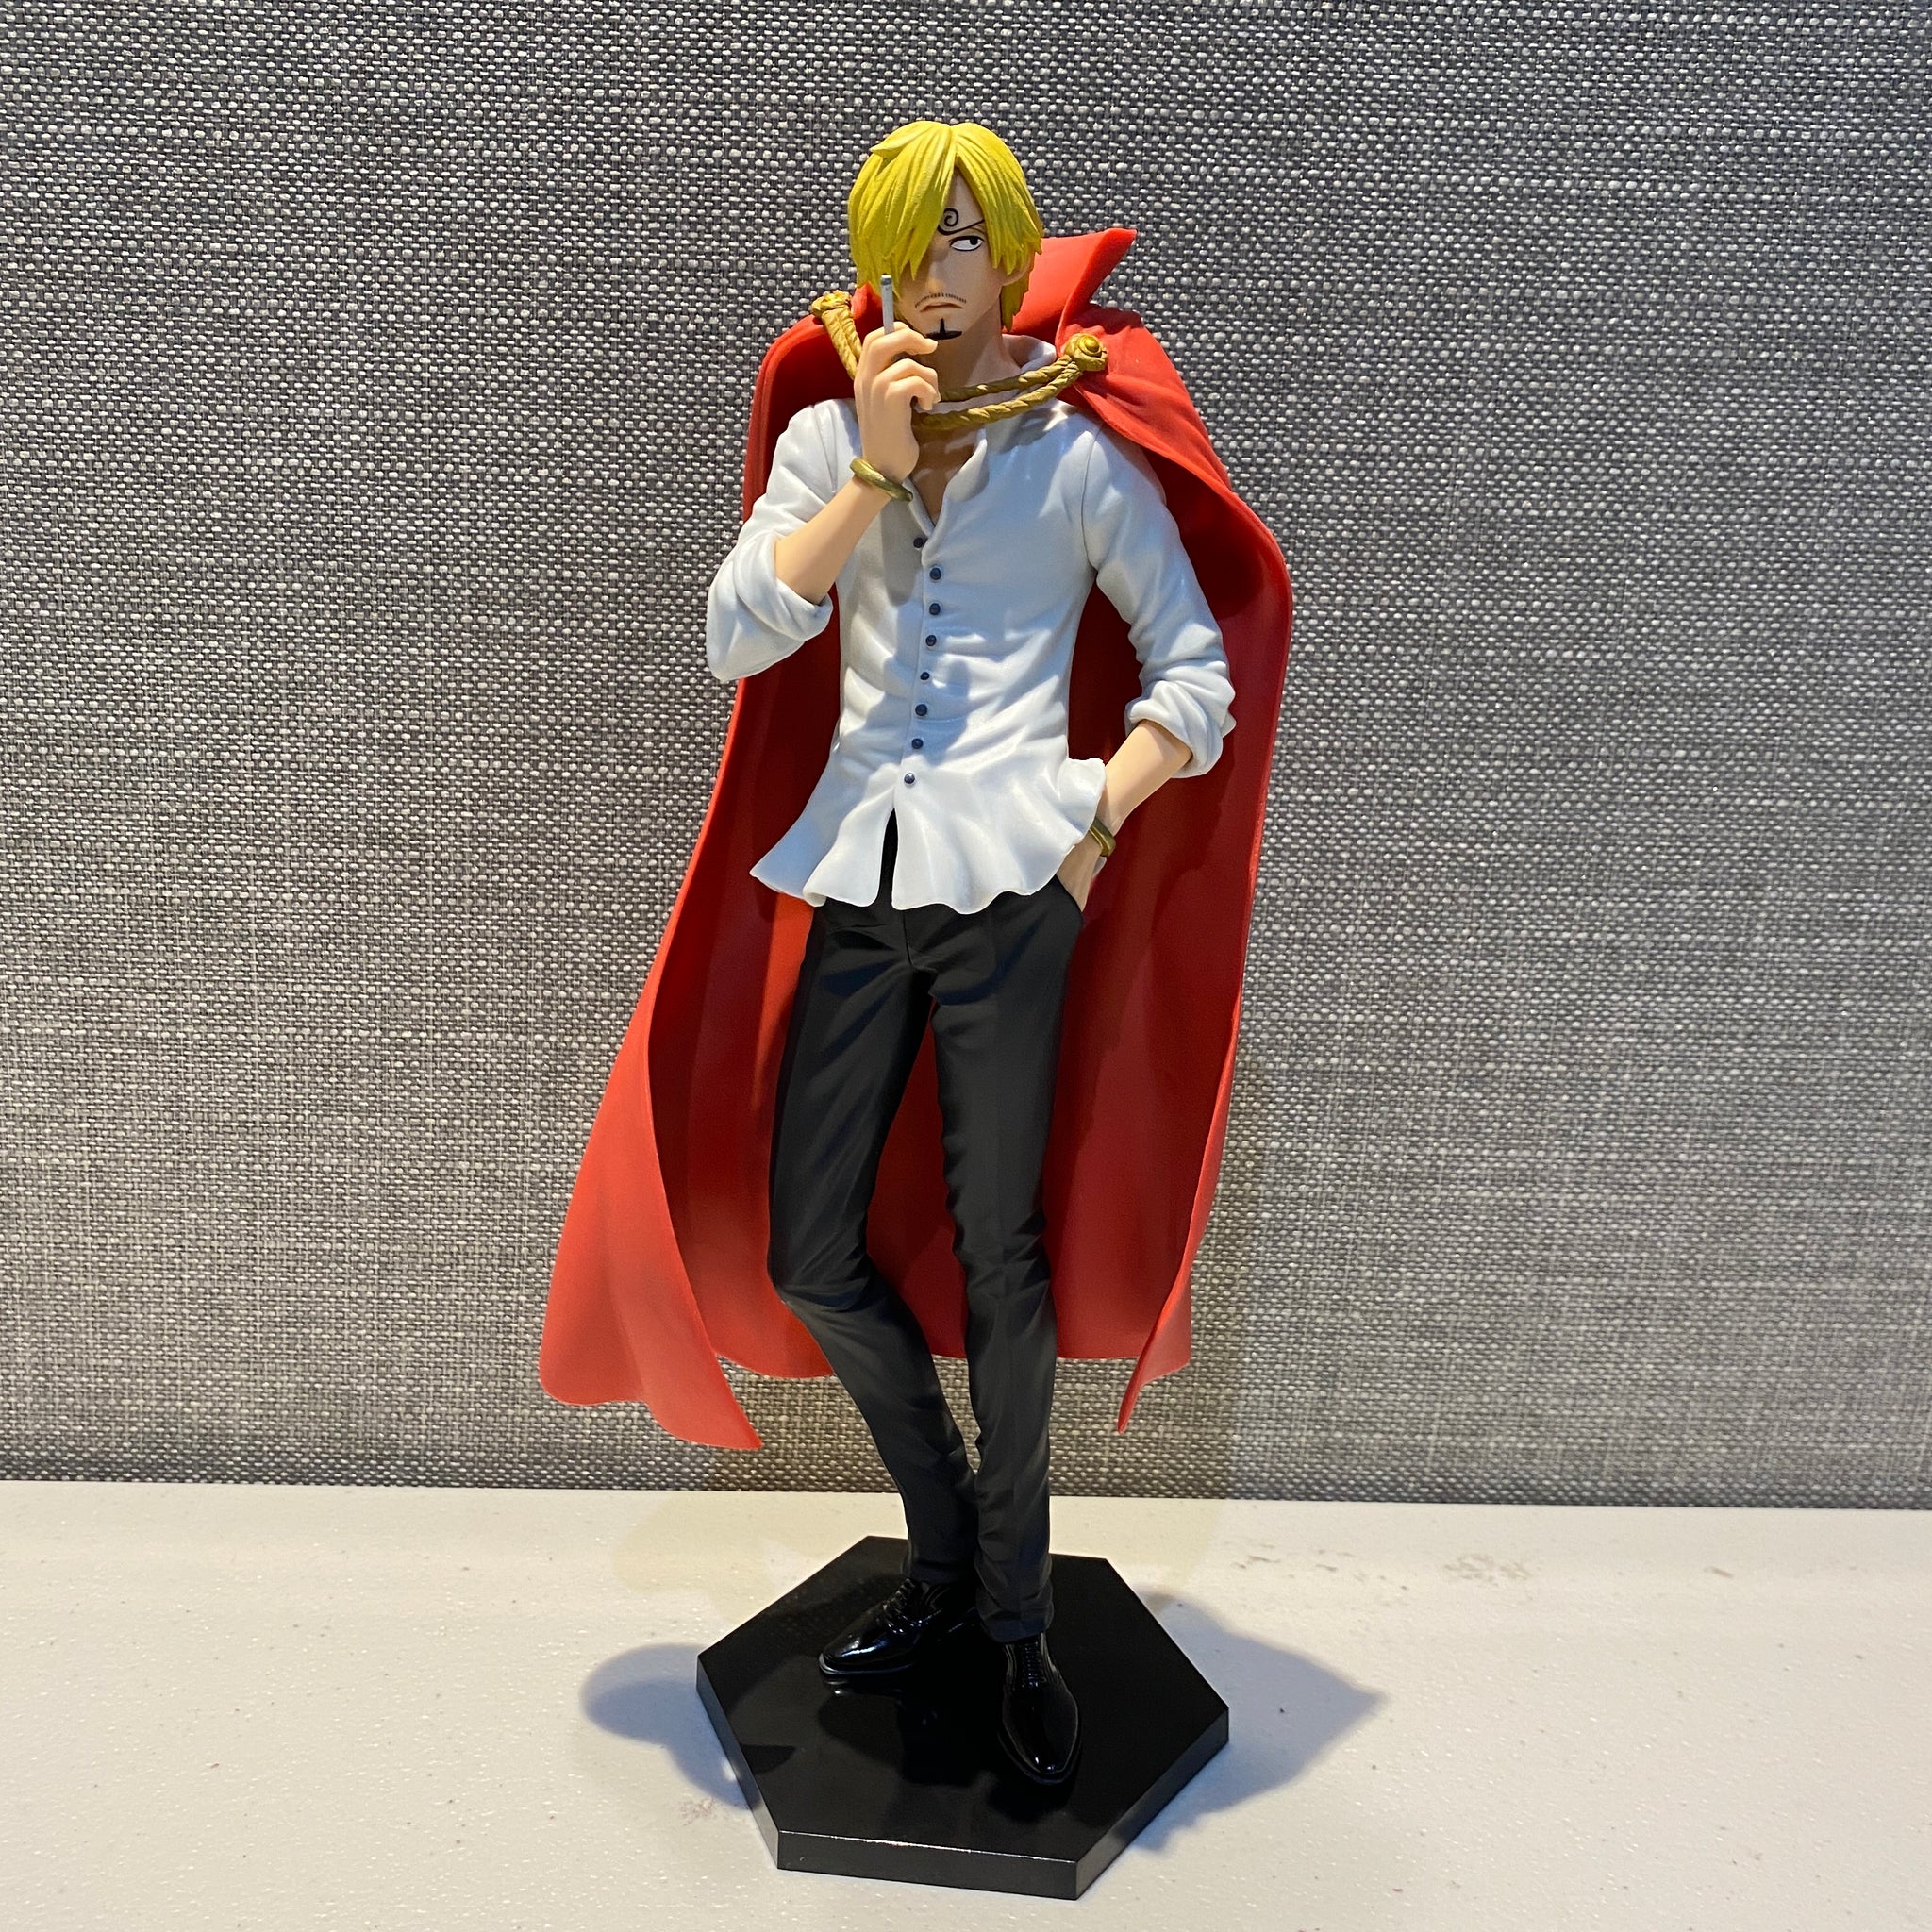 Red Cloak Sanji, Anime One Piece Model, Toy Collection Statue